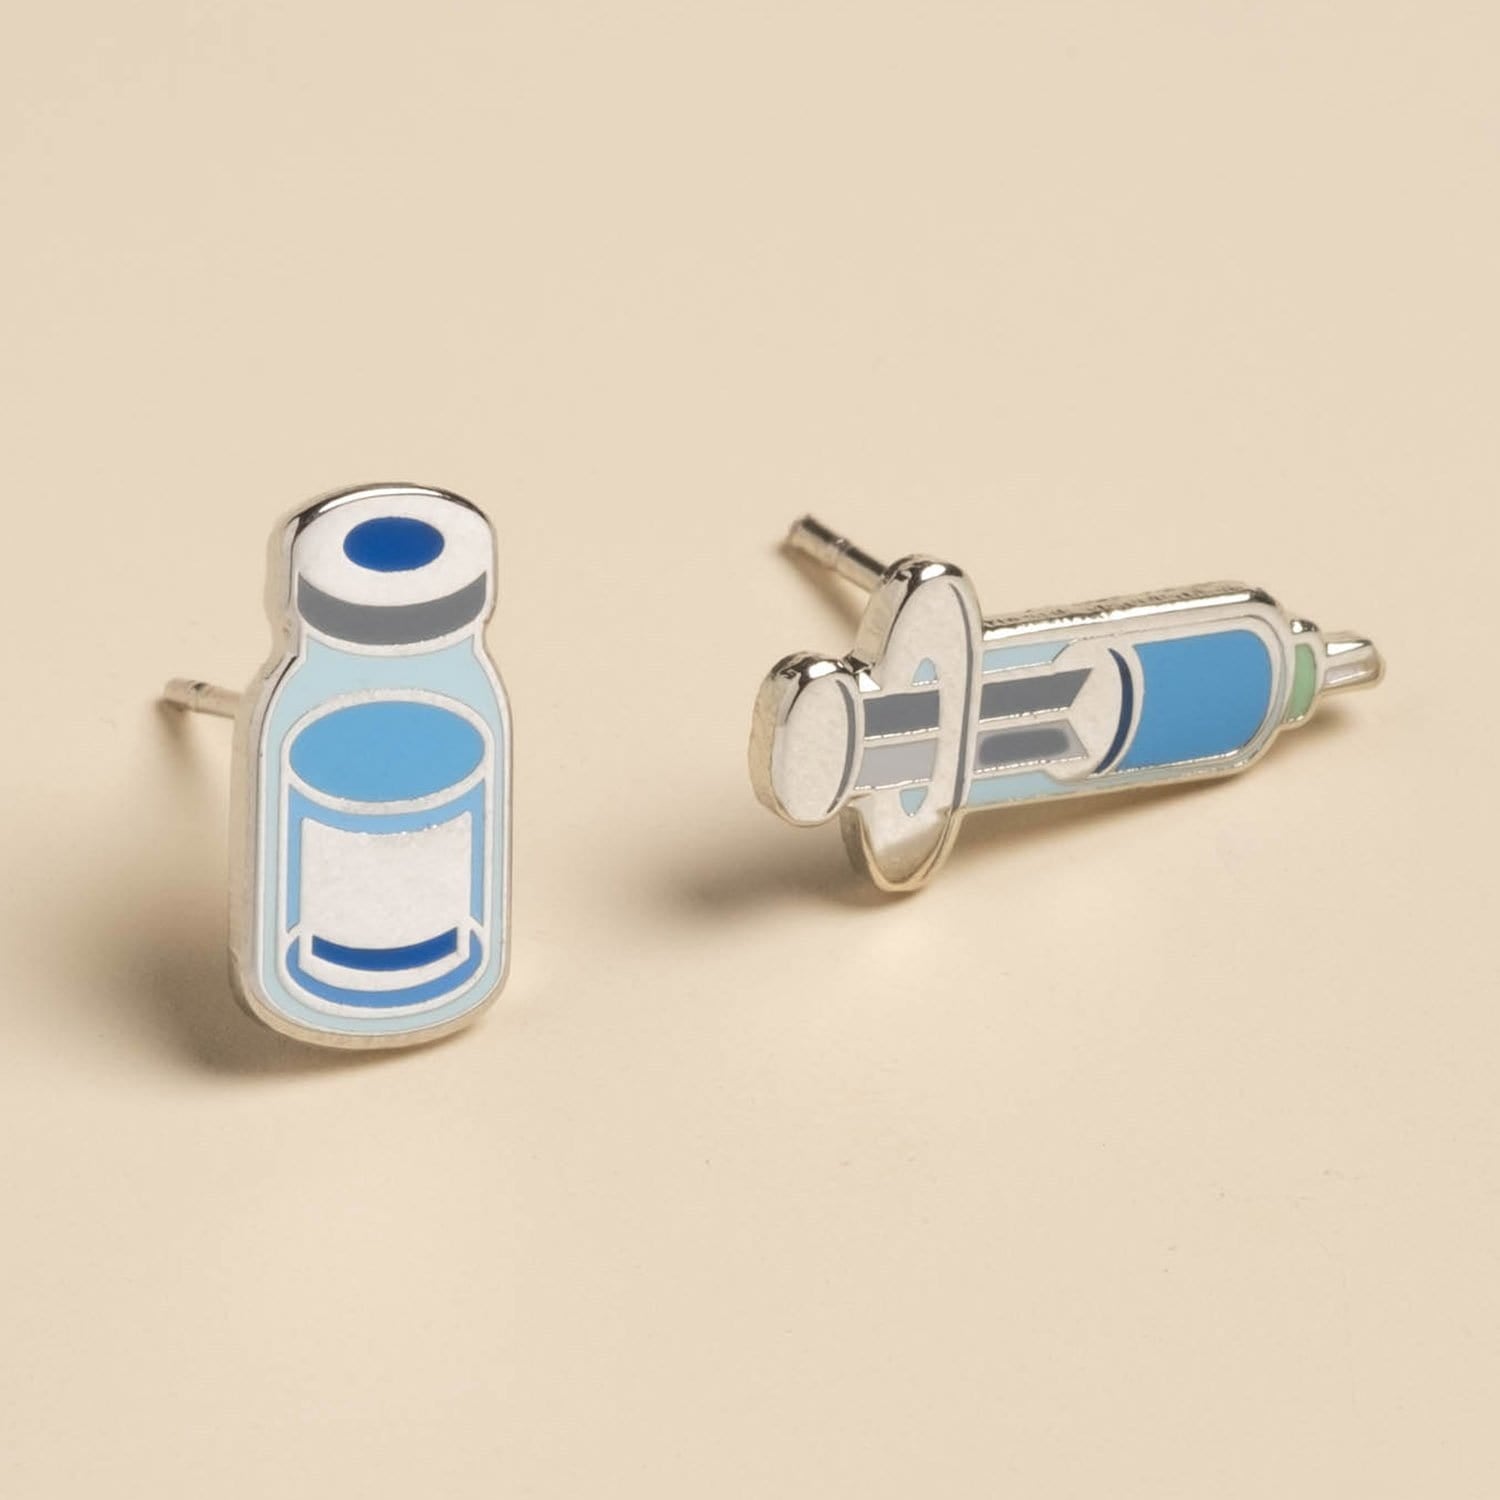 Vaccine Syringe and Vial (mixed set) Post Earrings